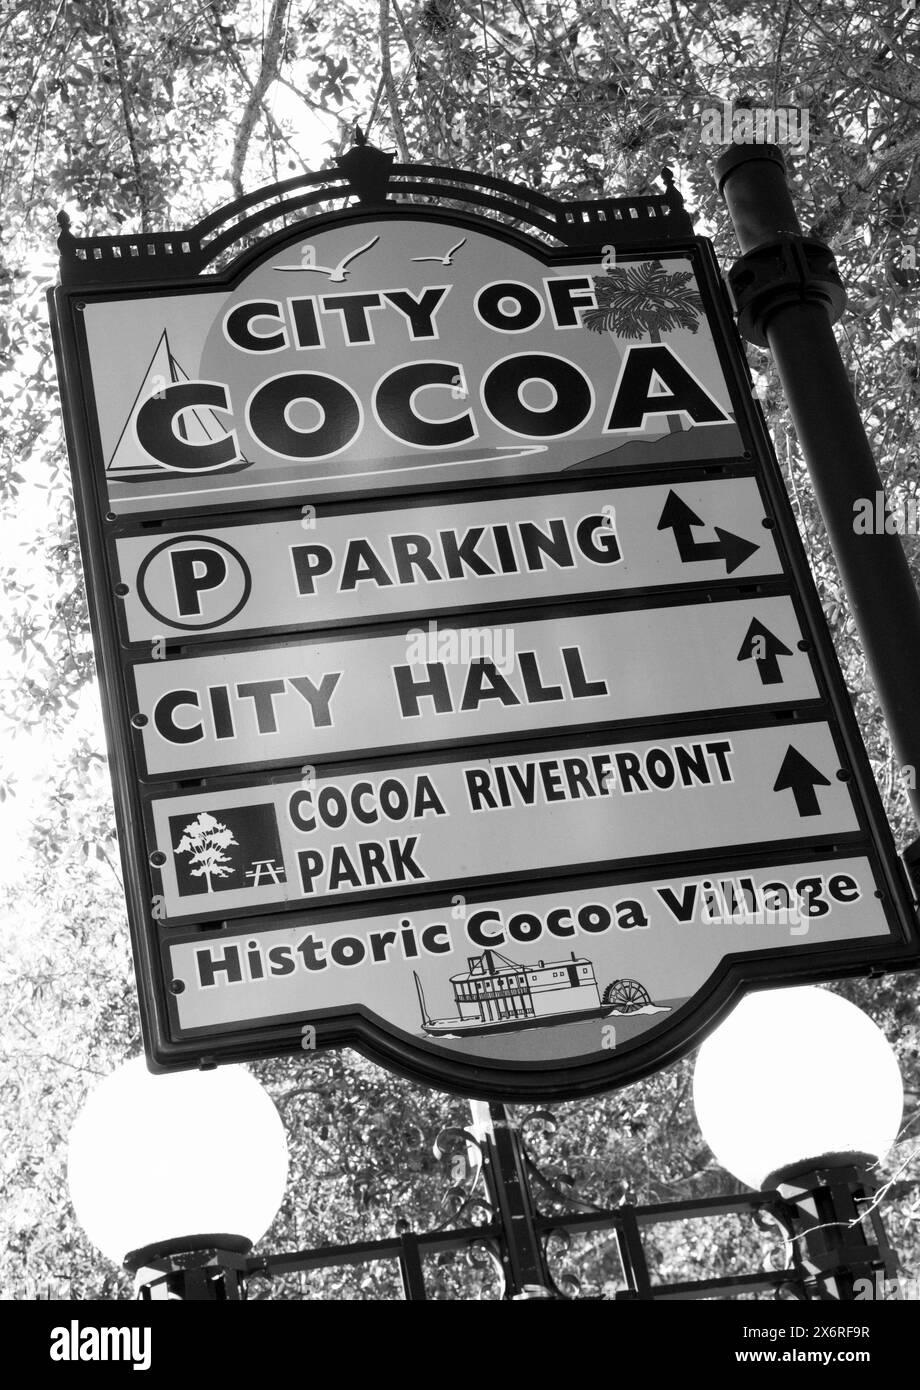 Stockfoto des Informationsschilds „City of Cocoa“ in Florida. FL USA Stockfoto